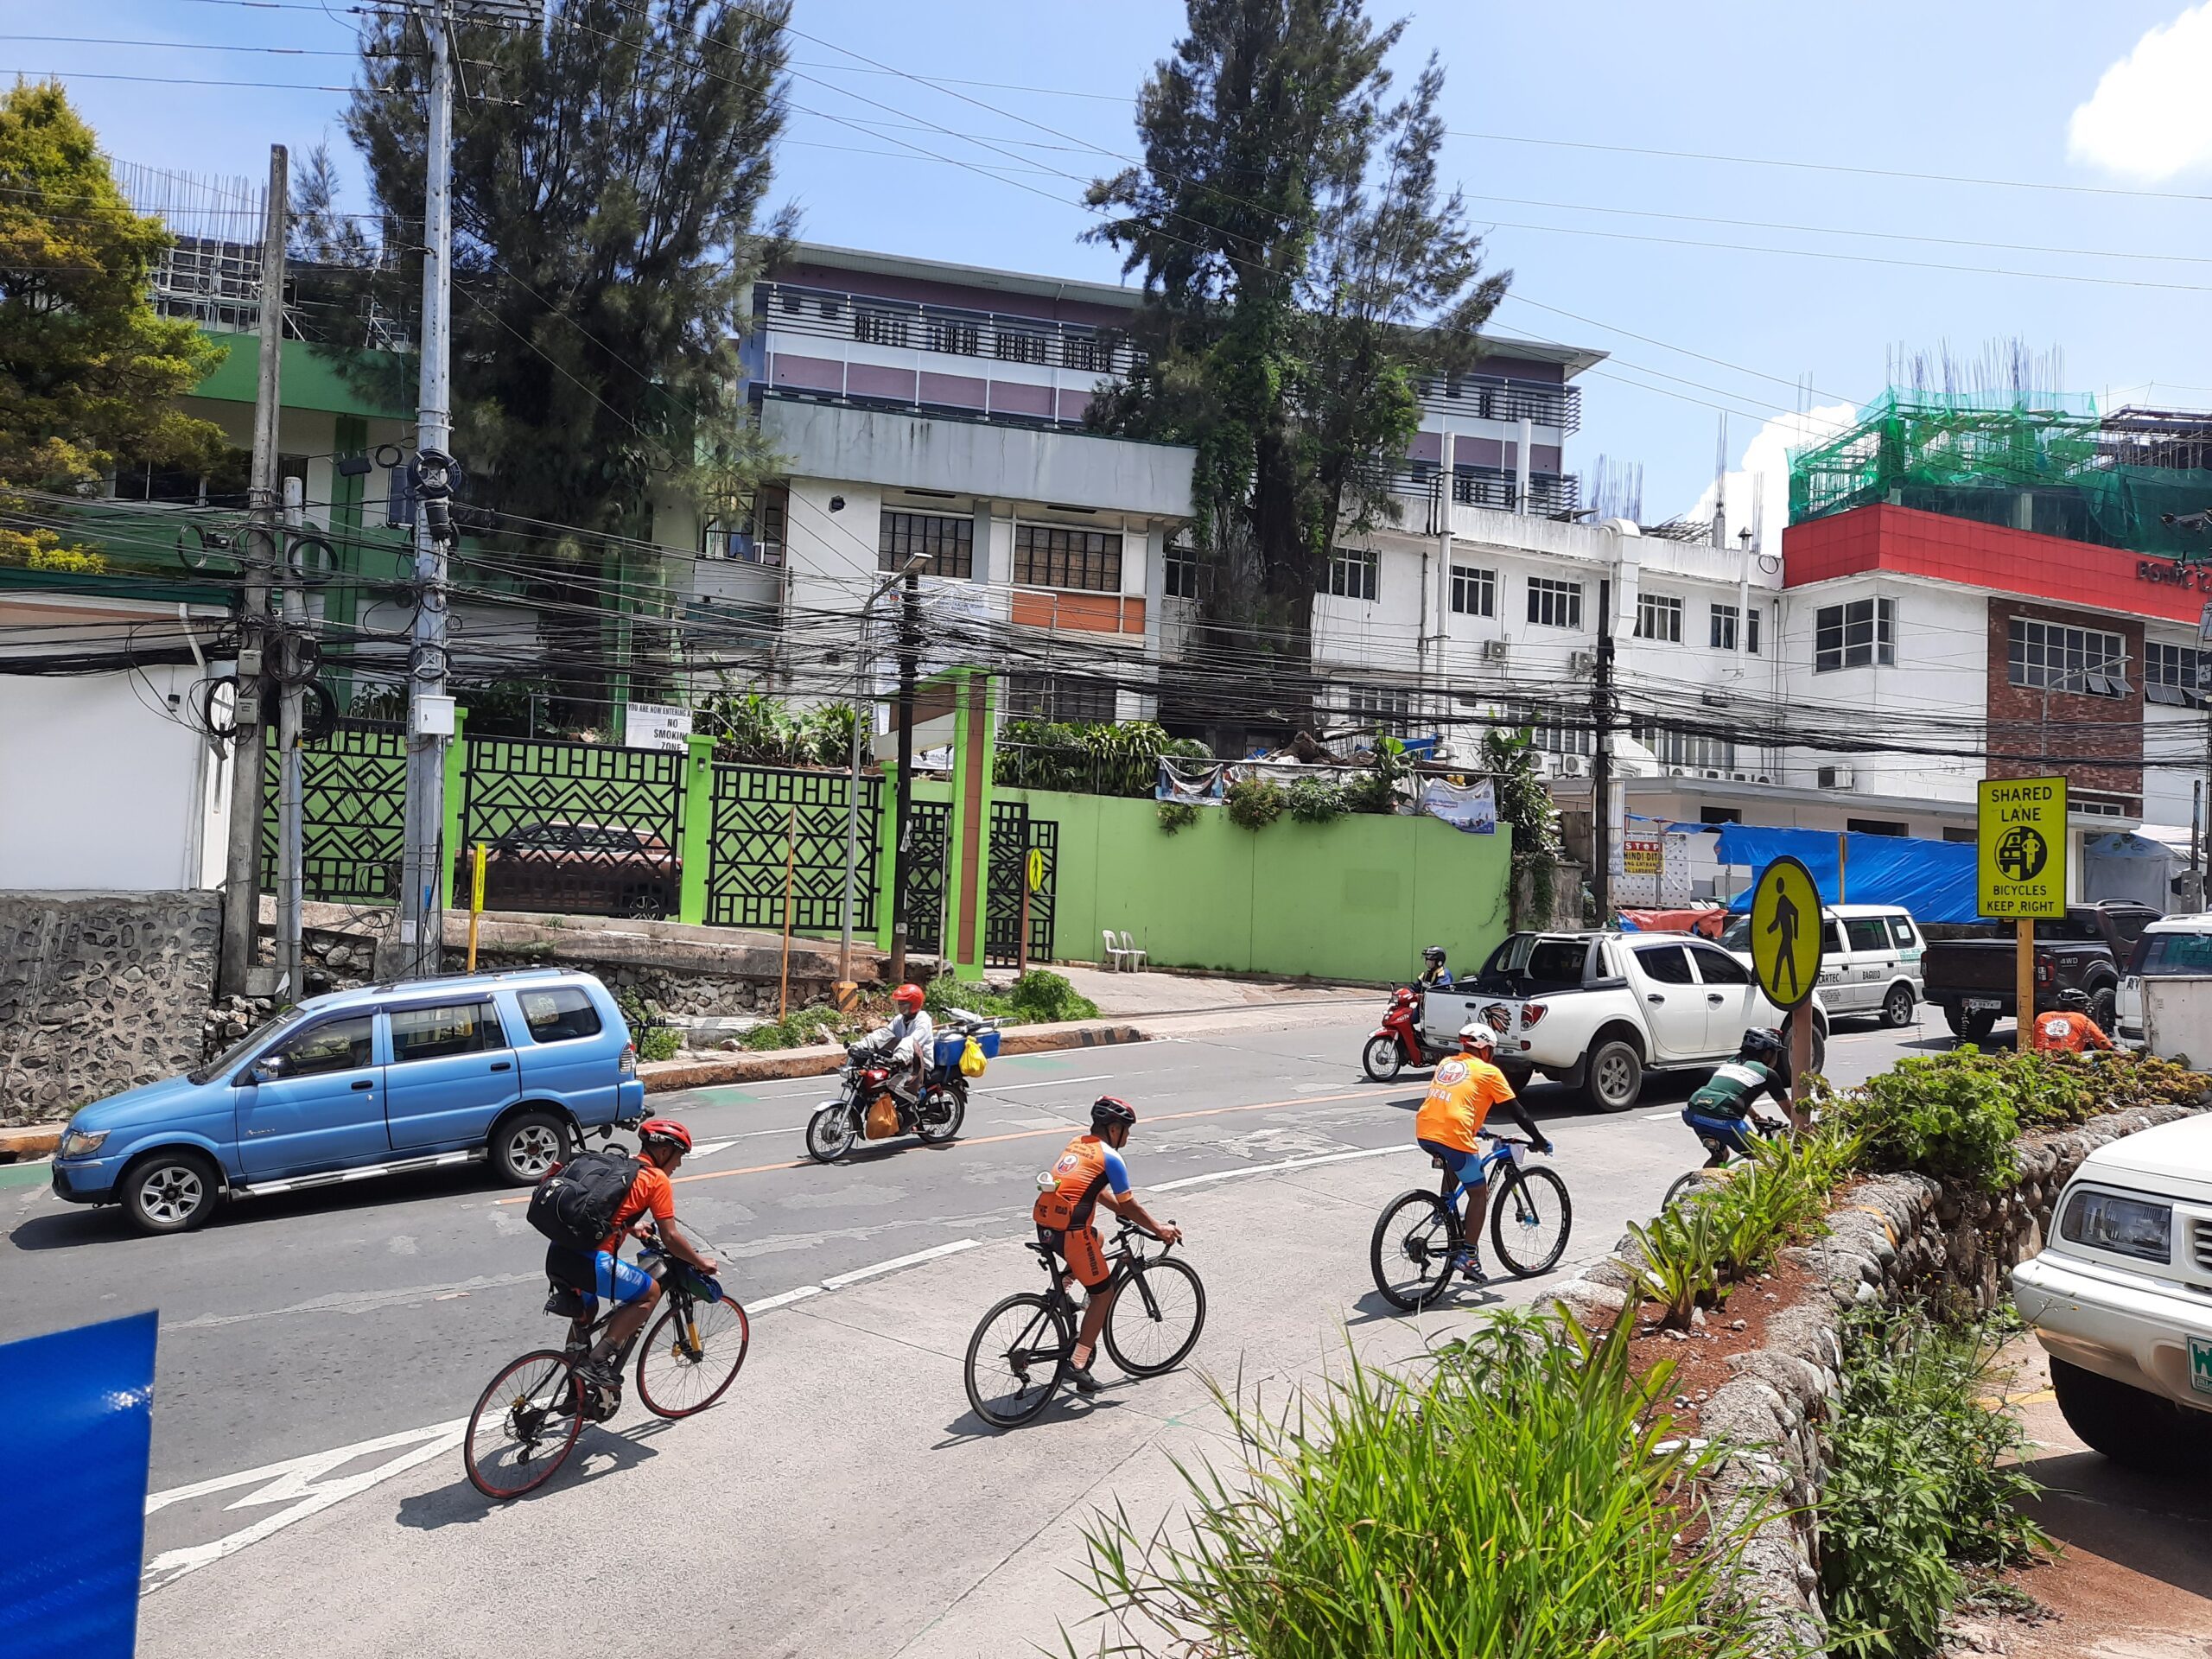 Cyclists take on challenging terrains as bike festival begins in Baguio